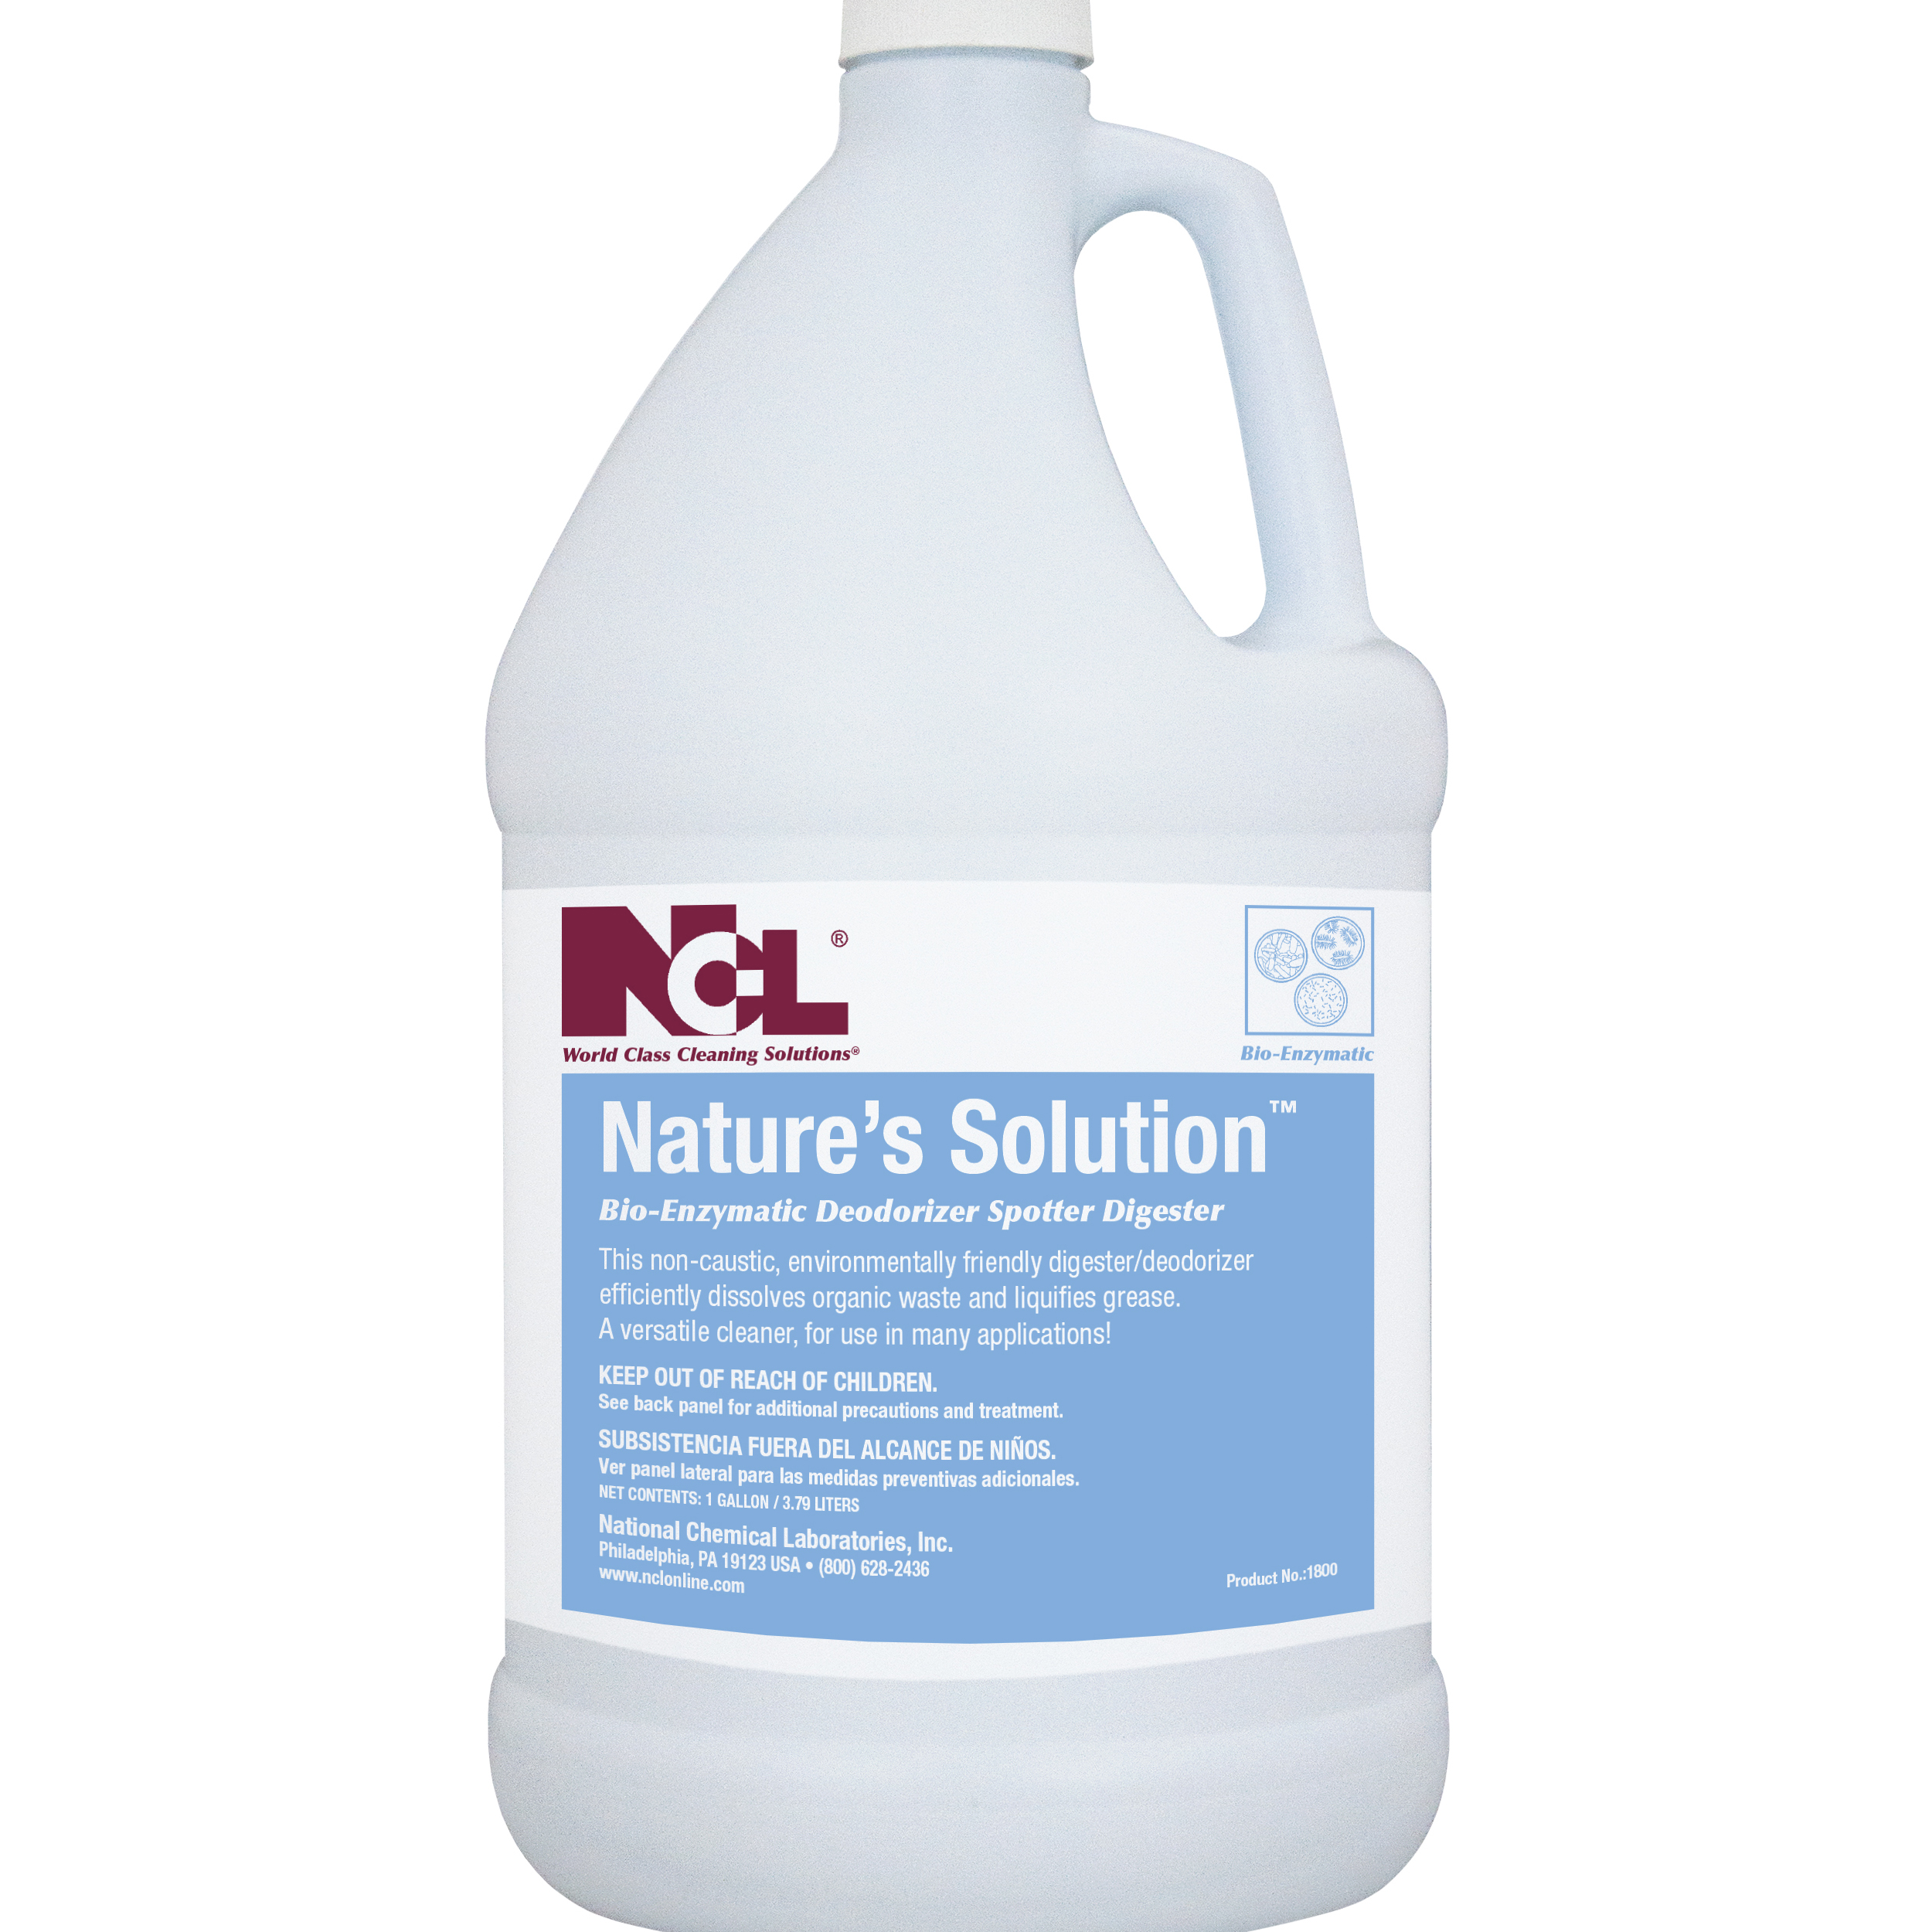  NATURE'S SOLUTION Bio-Enzymatic Deodorizer / Spotter / Digester 4/1 Gal. Case (NCL1800-29) 